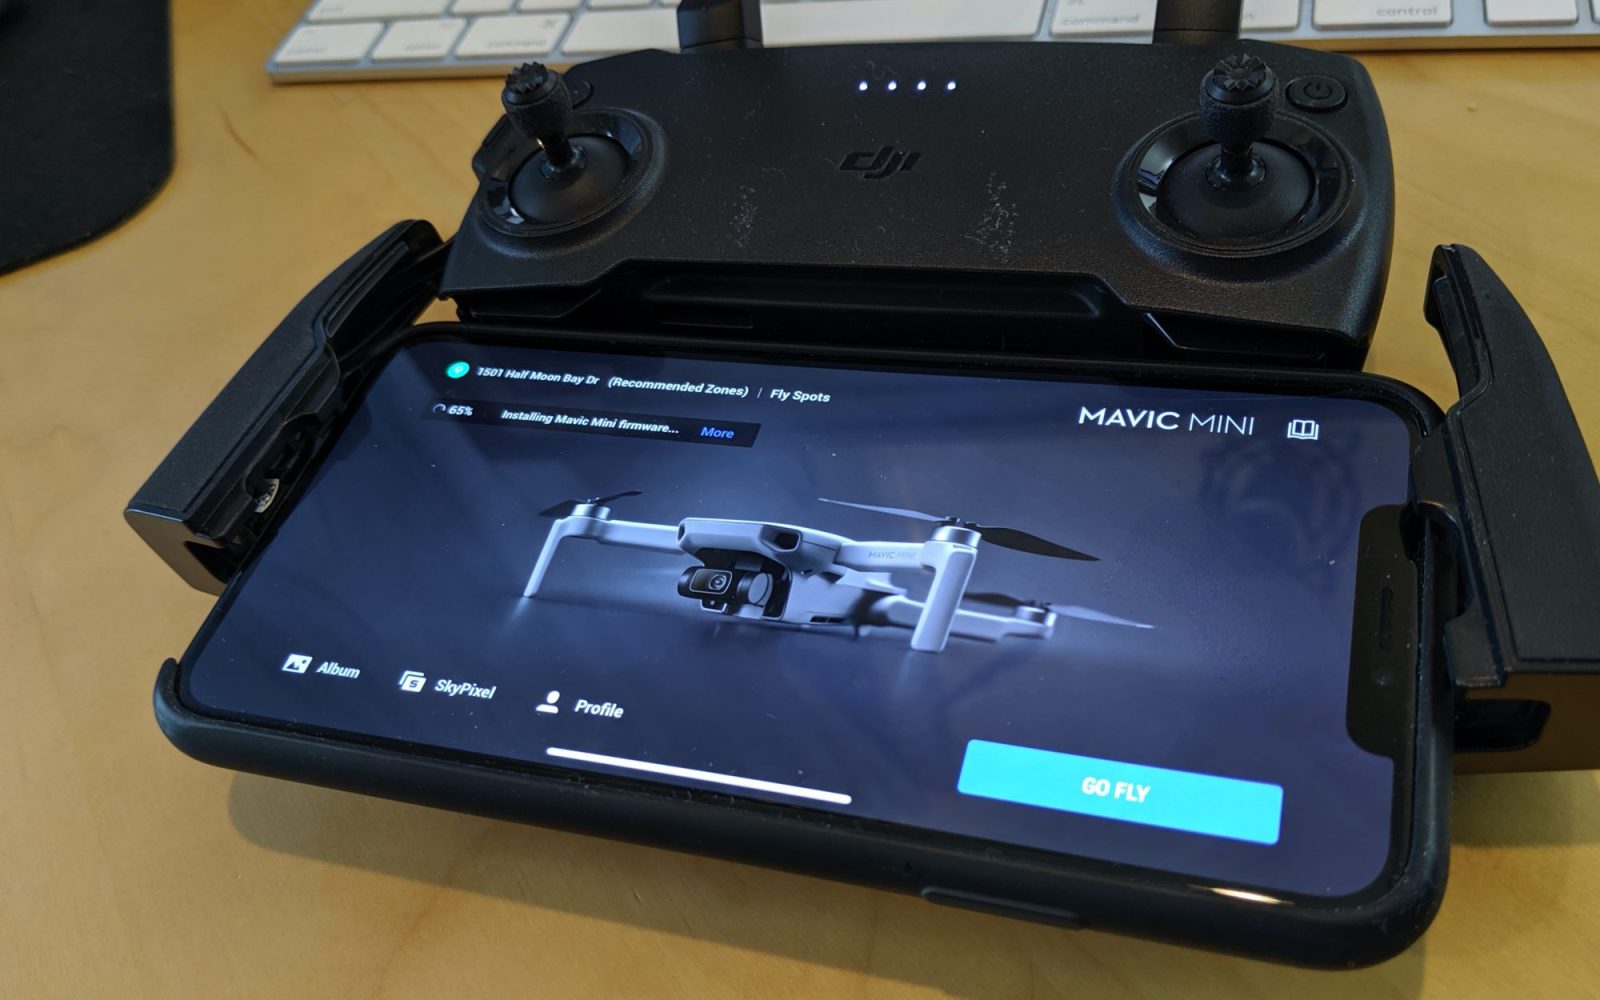 Before you fly the DJI Mavic Mini do this first - firmware update